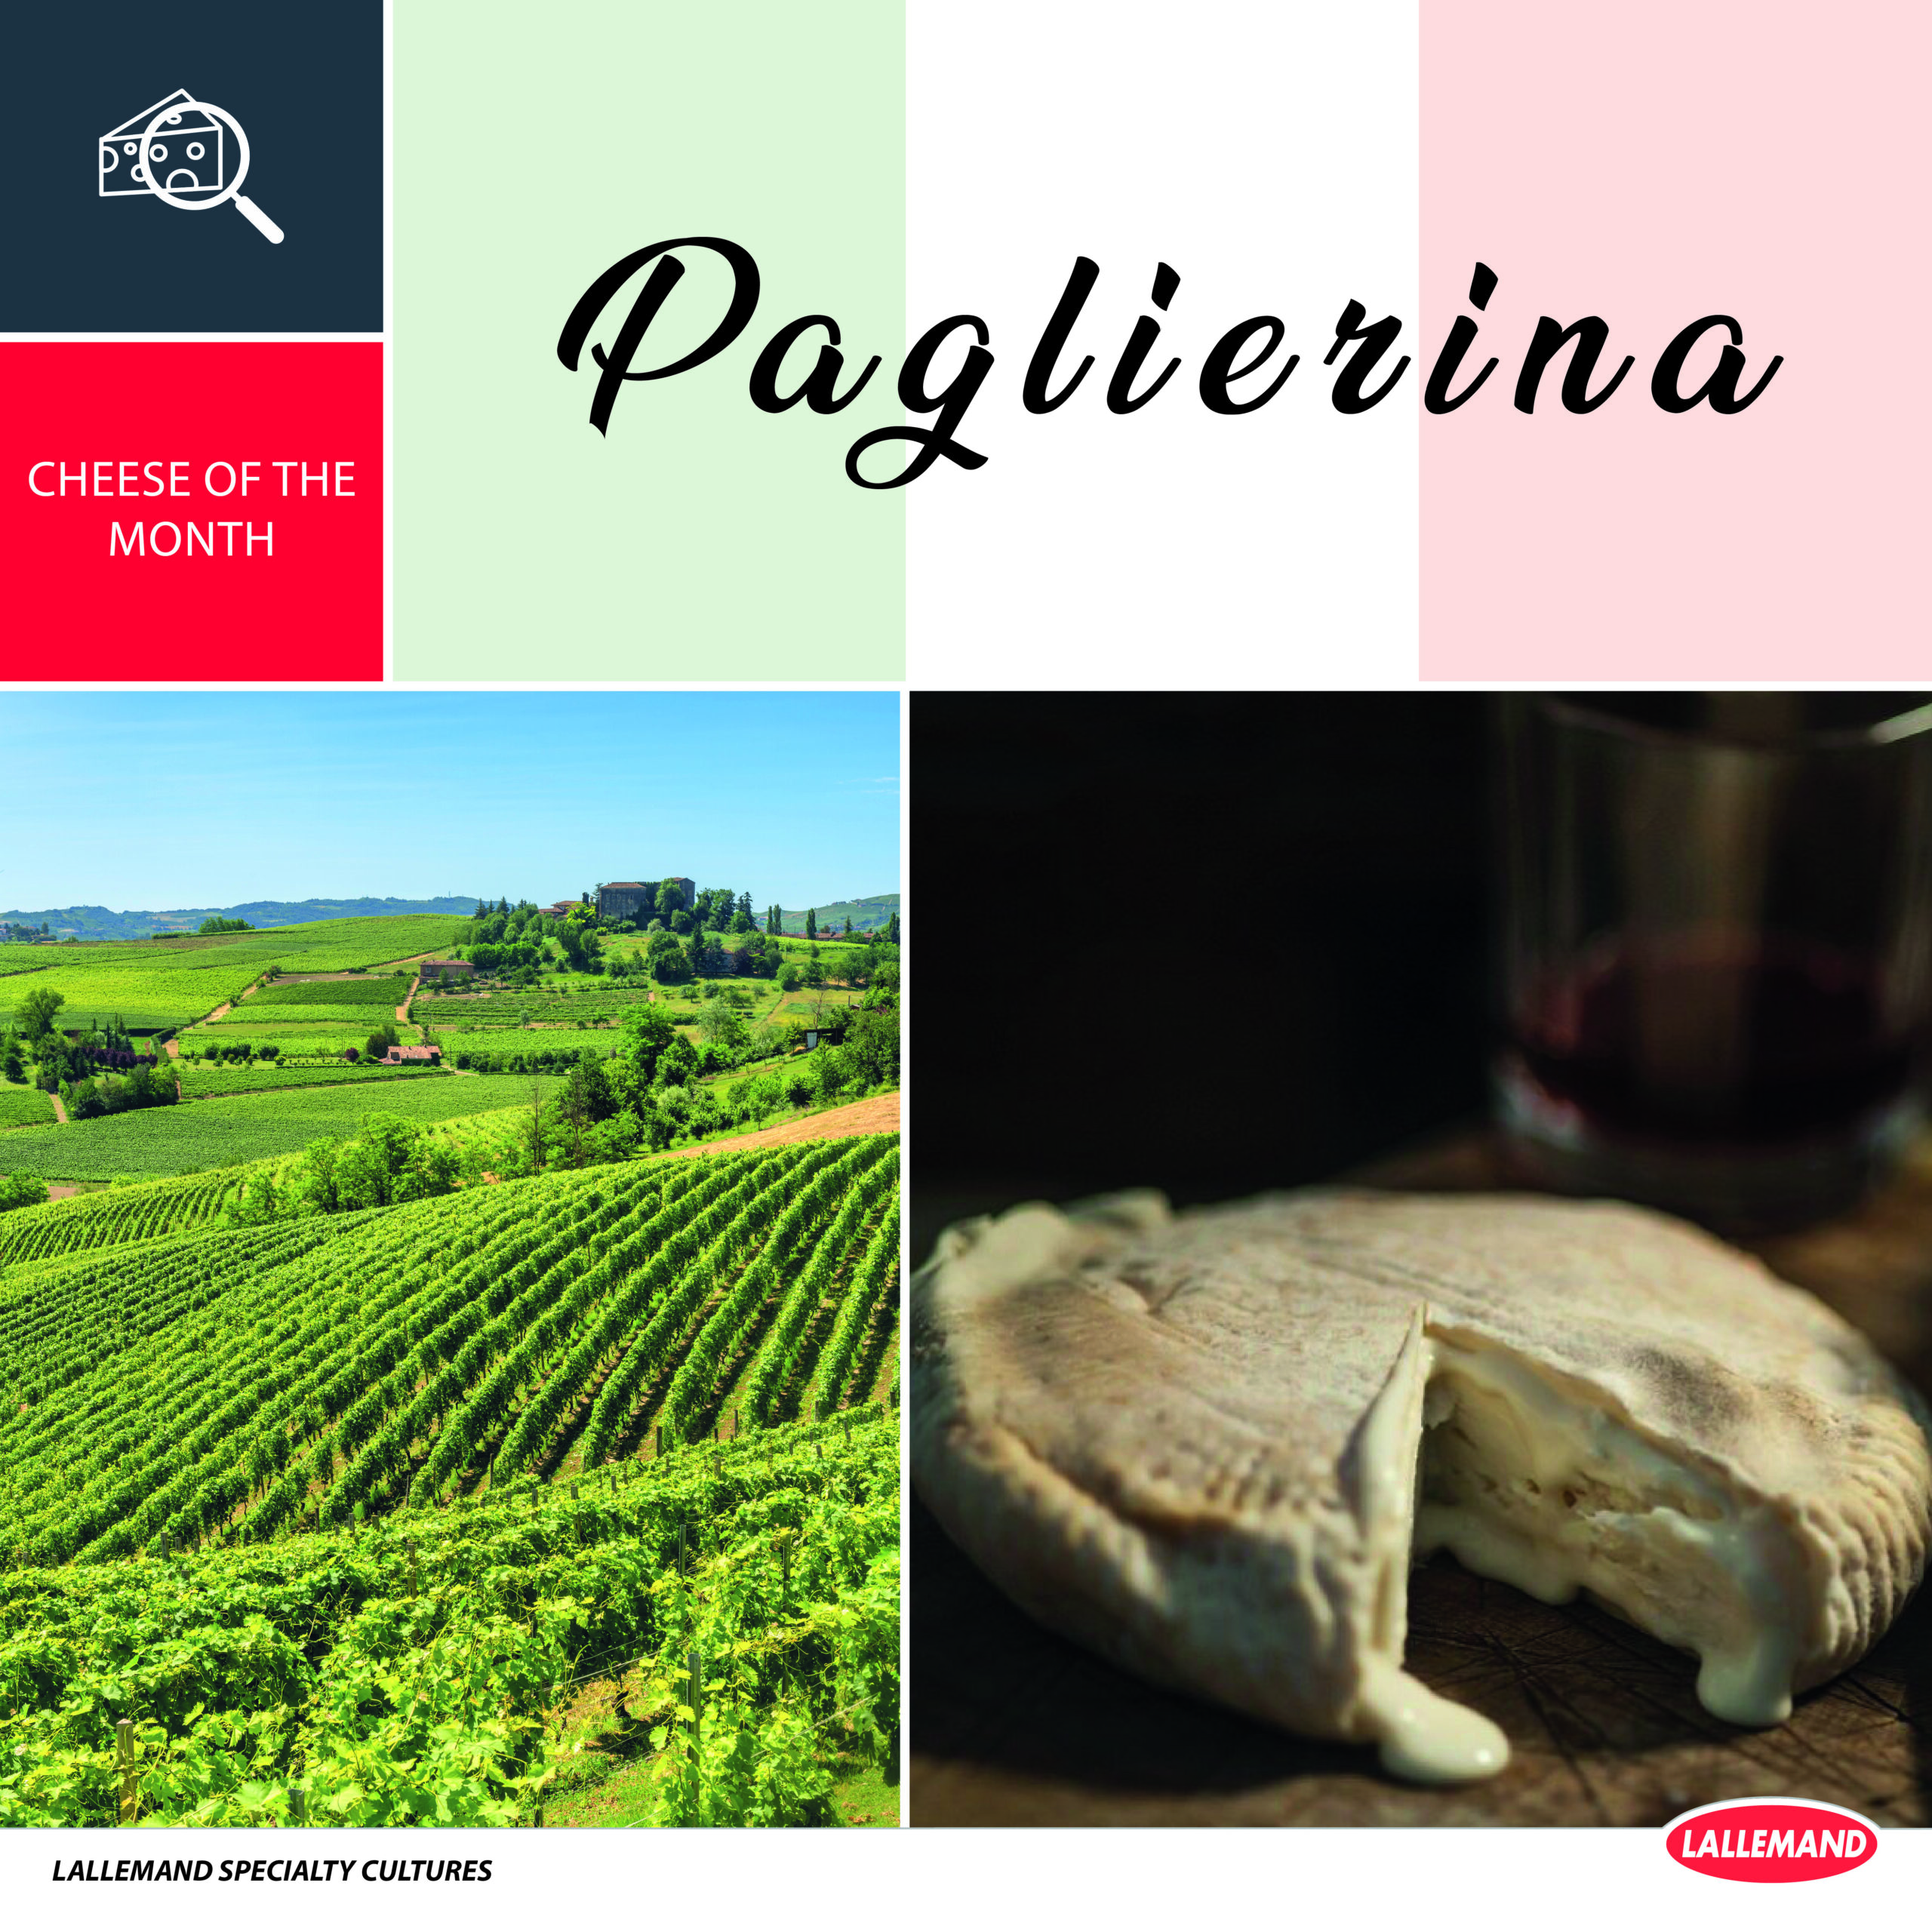 Paglierina, a delicious cheese from Italy!